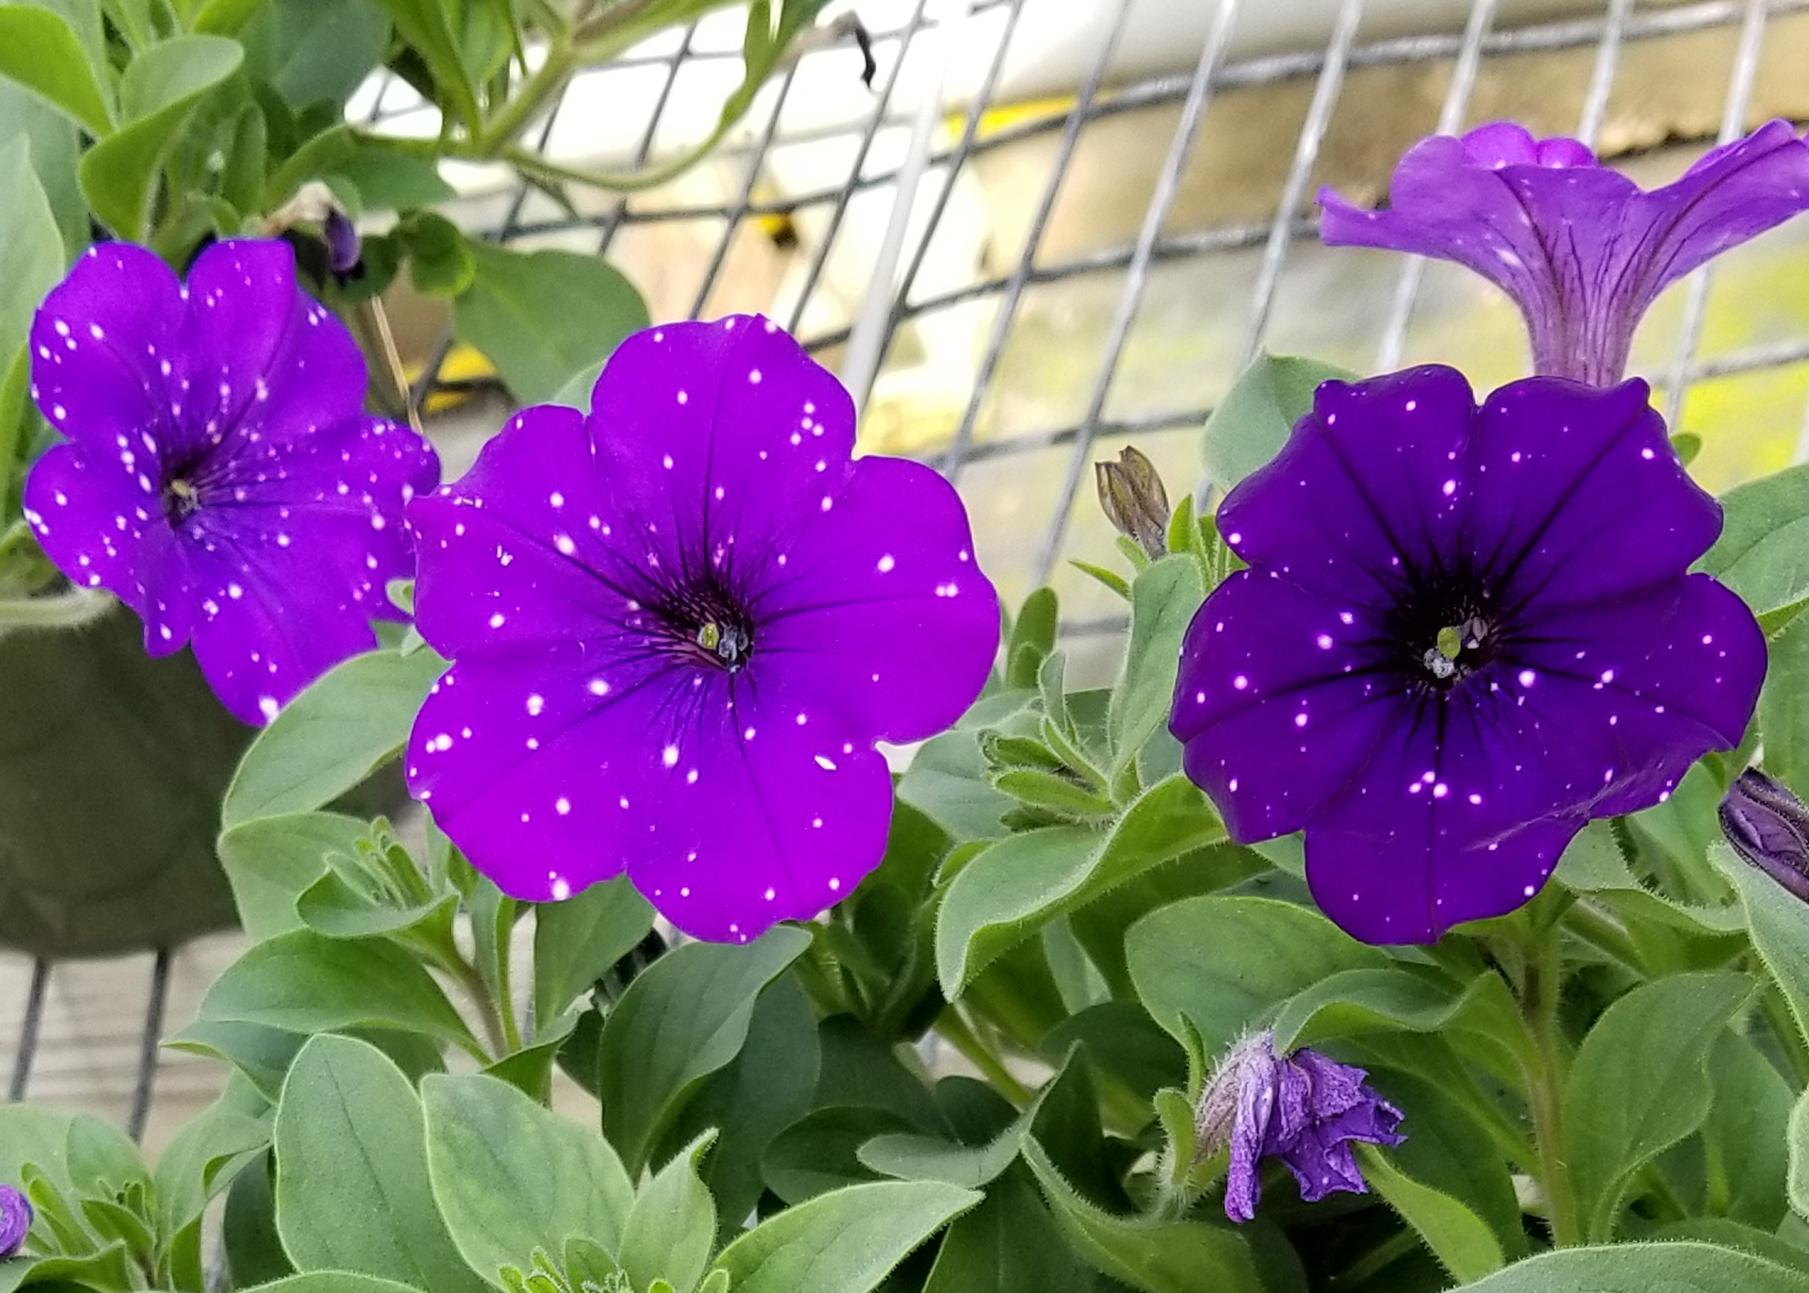 Individual purple flowers rise above the greenery placed on an open-grid surface.